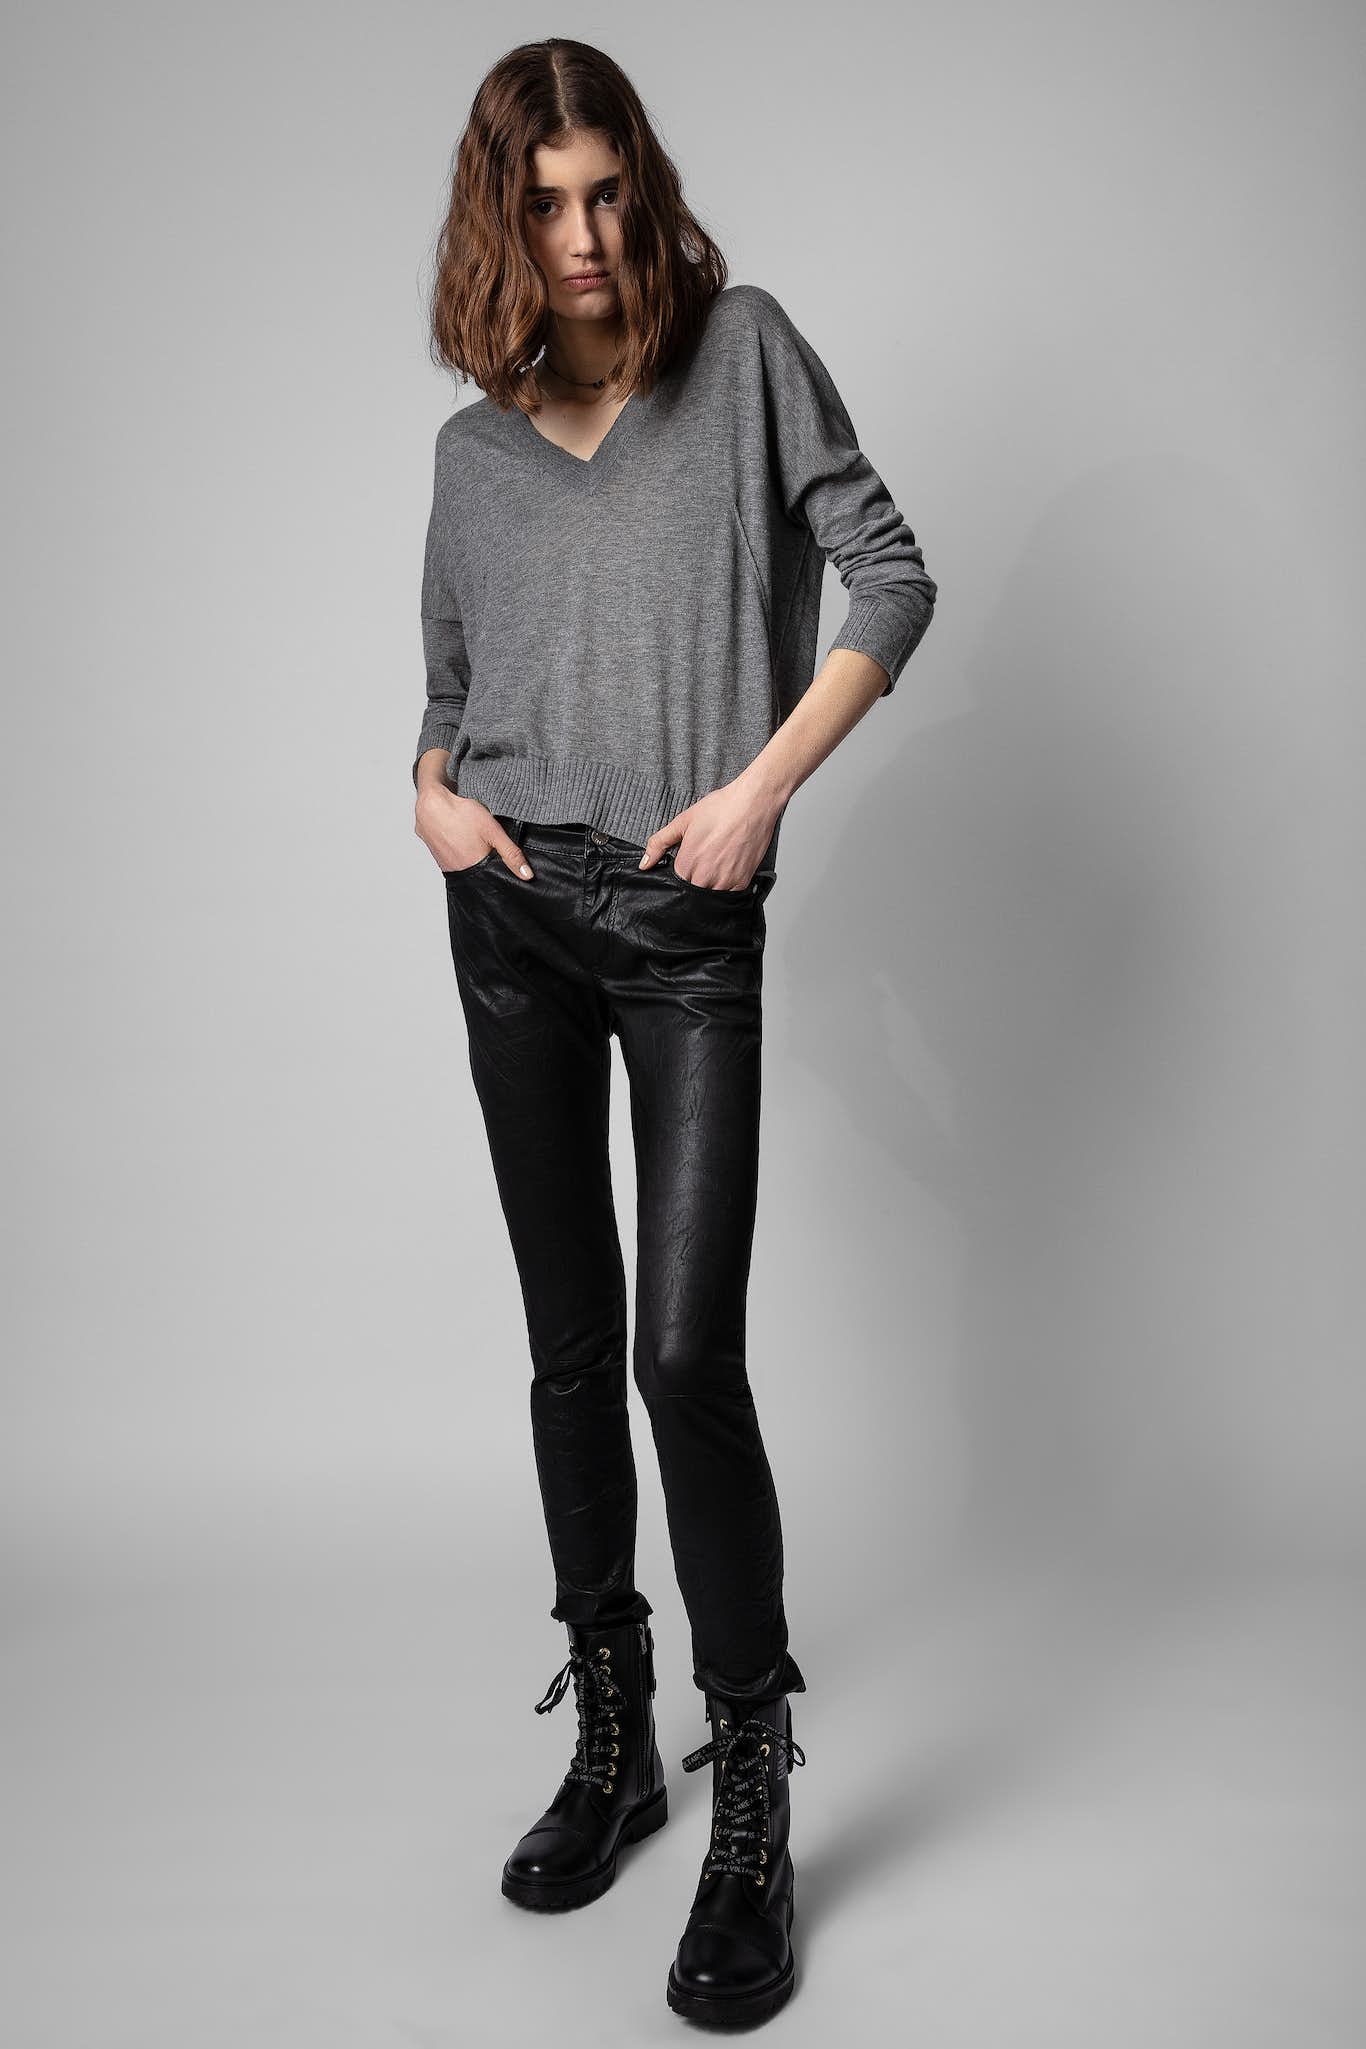 Zadig & Voltaire Phlame Leather Jean - Garbarini